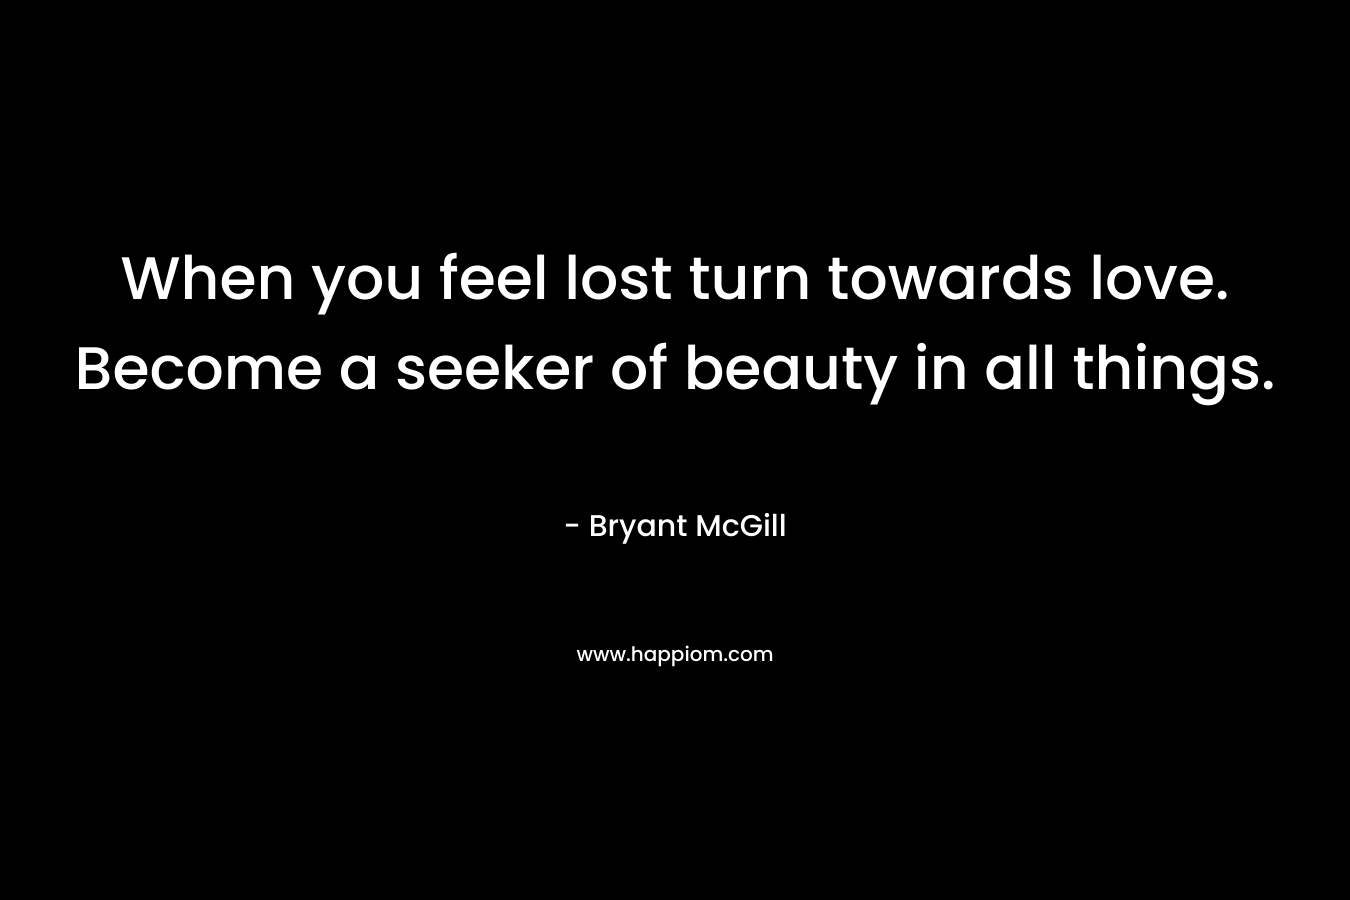 When you feel lost turn towards love. Become a seeker of beauty in all things. – Bryant McGill